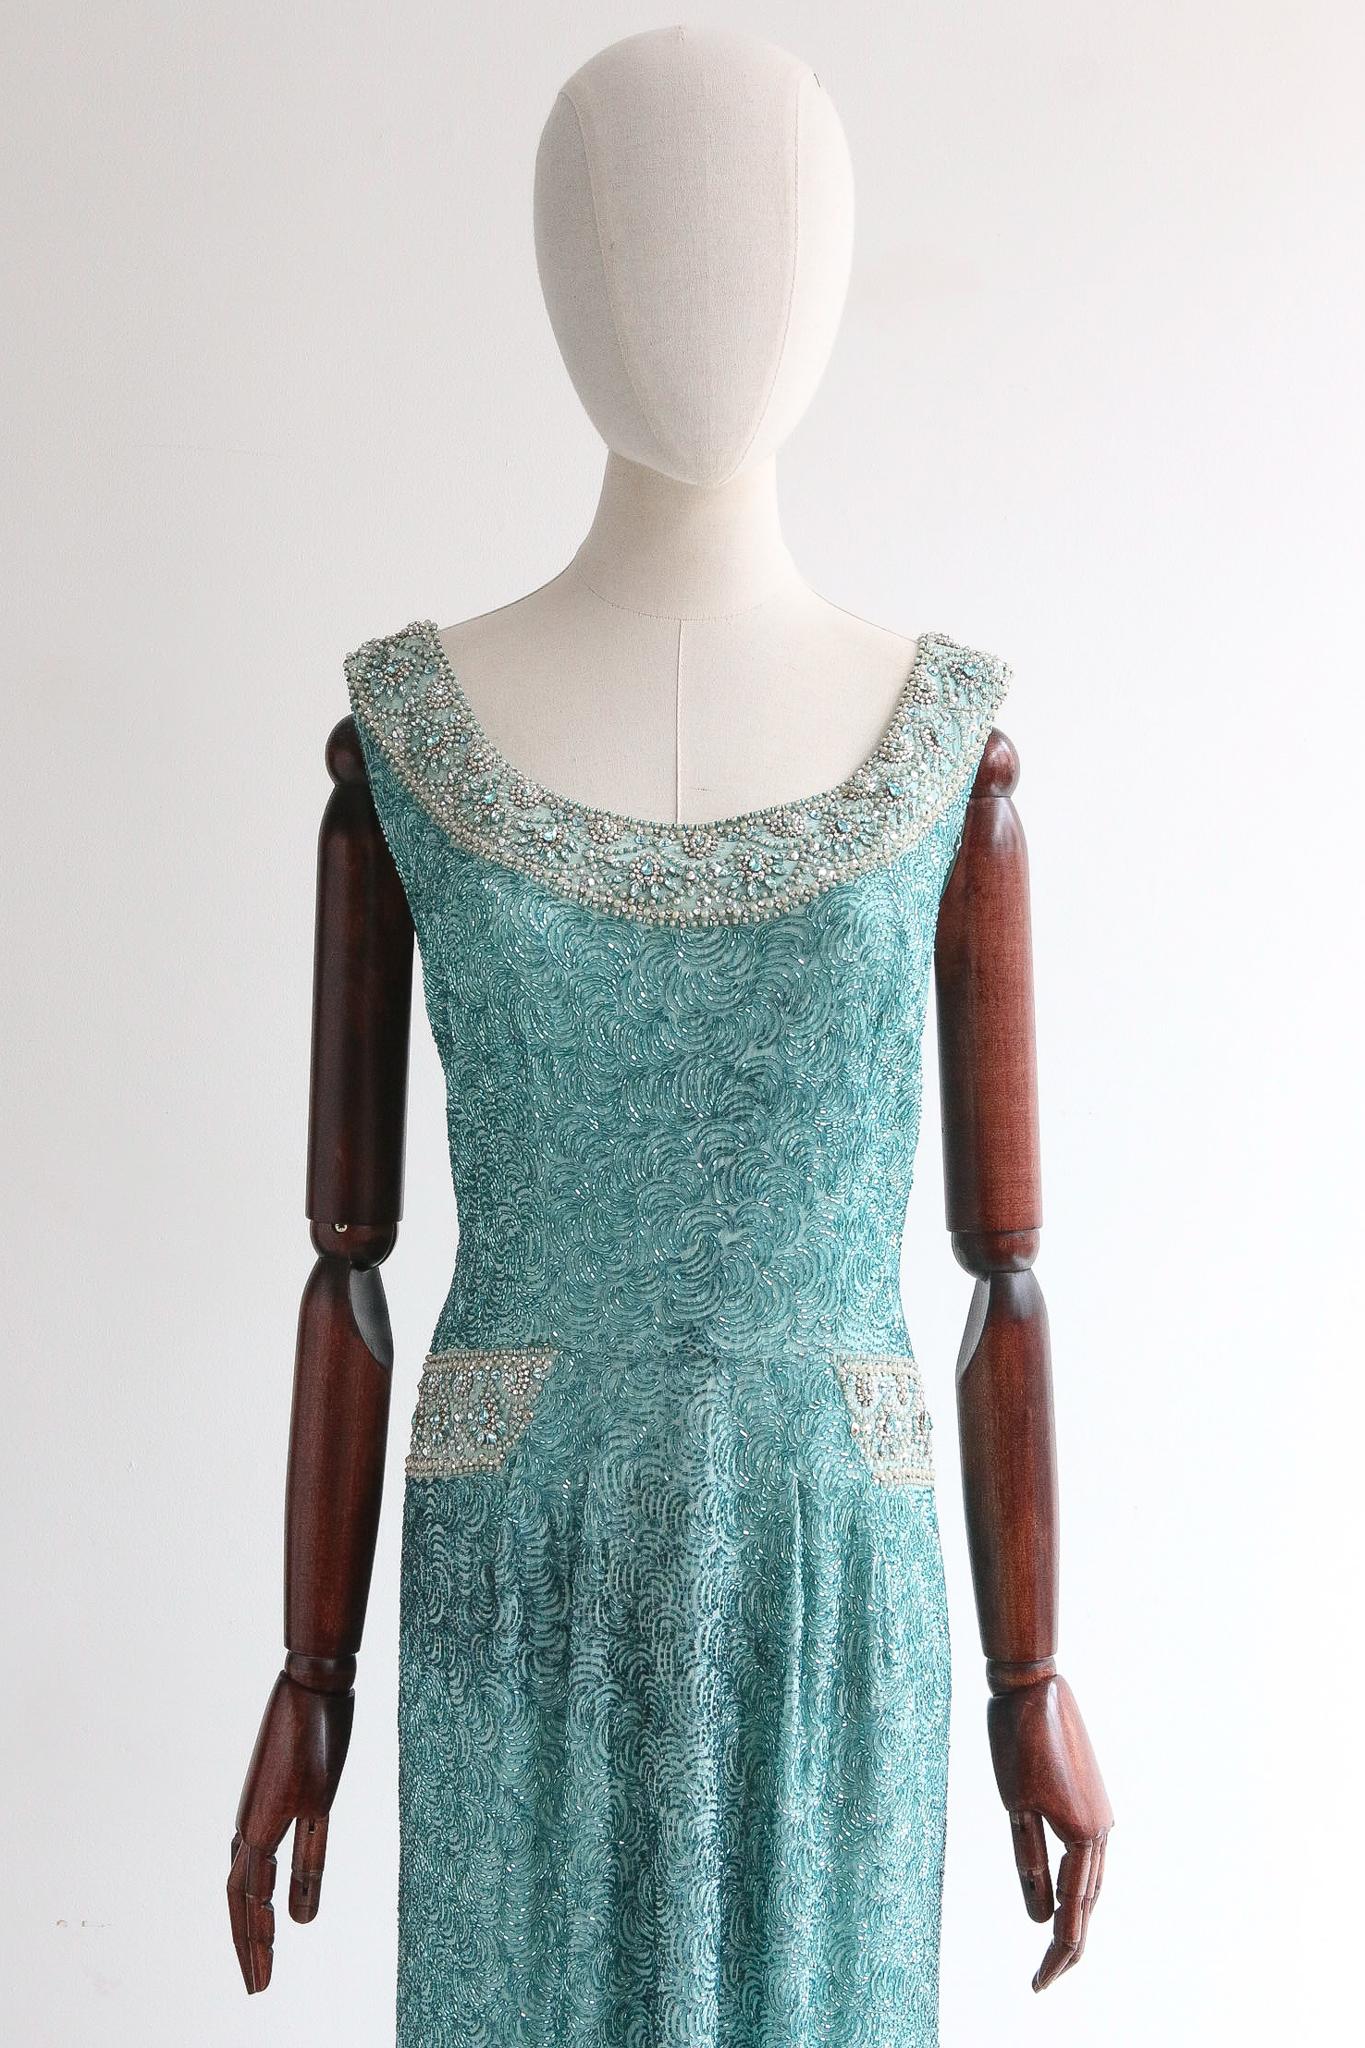 This breathtaking late 1950's Norman Hartnell cocktail dress, on a silk base and fully embellished with trailing glass beadwork, glass rhinestones and pearlised bead accents is a rare piece of history to behold. 

The rounded neckline is framed by a